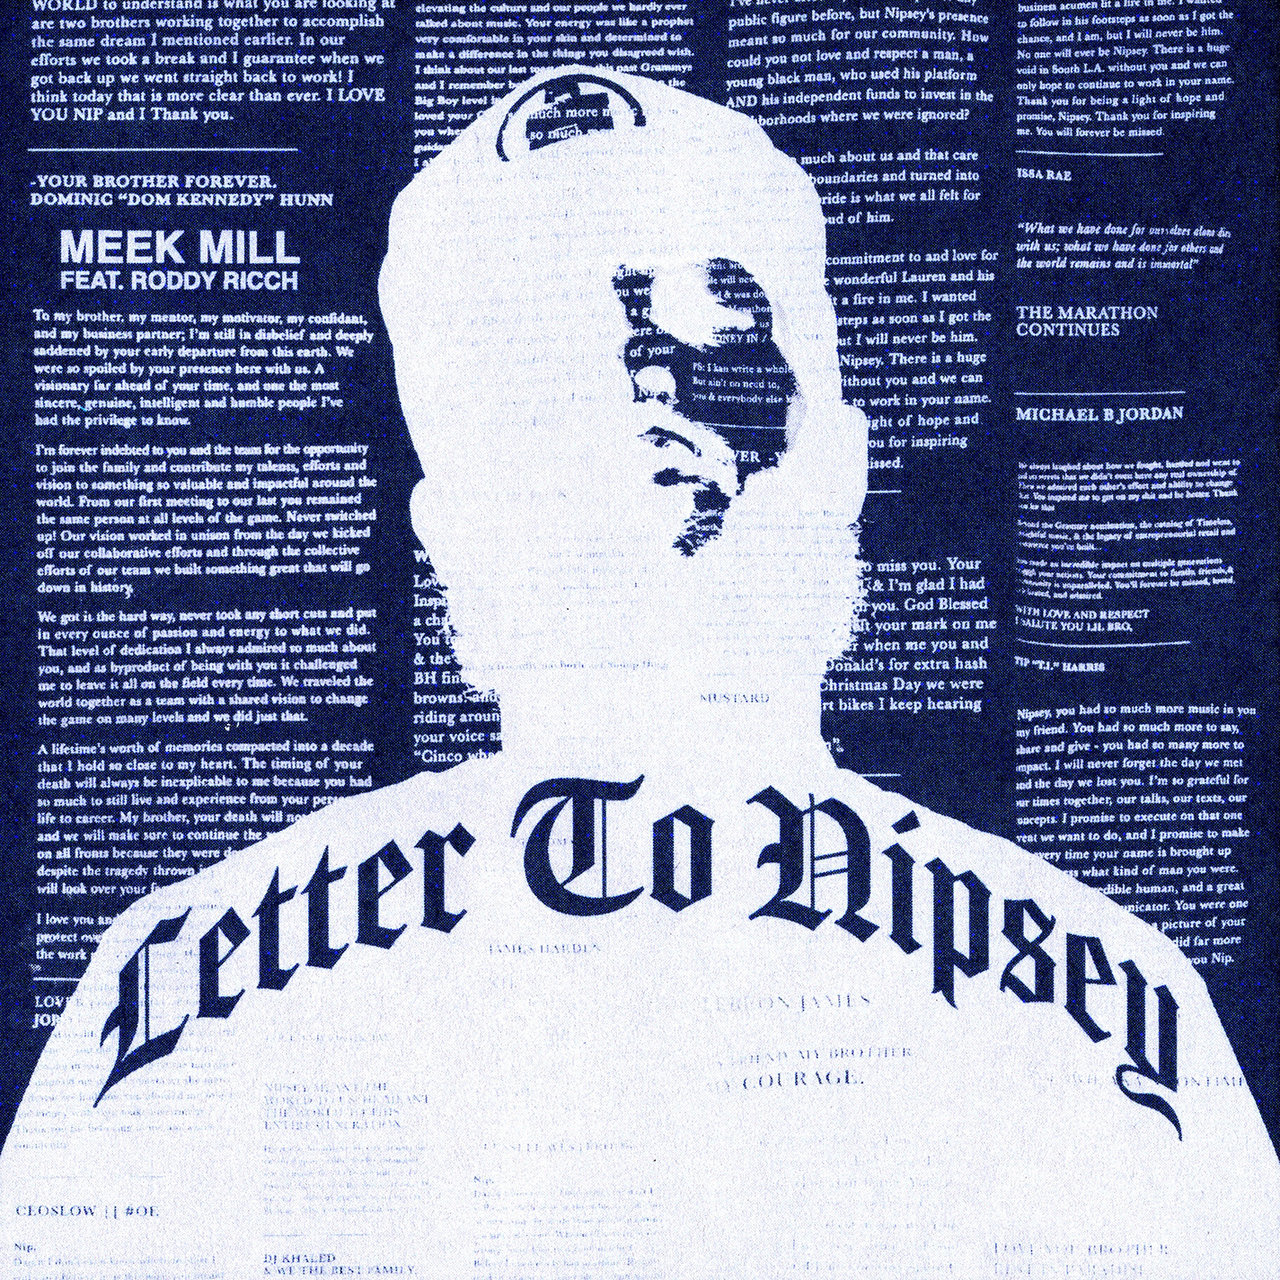 Meek Mill has connected with Roddy Ricch on his new single called "Letter To Nipsey". "Letter To Nipsey" is a reflection of the late great artist and businessman Nipsey Hussle.